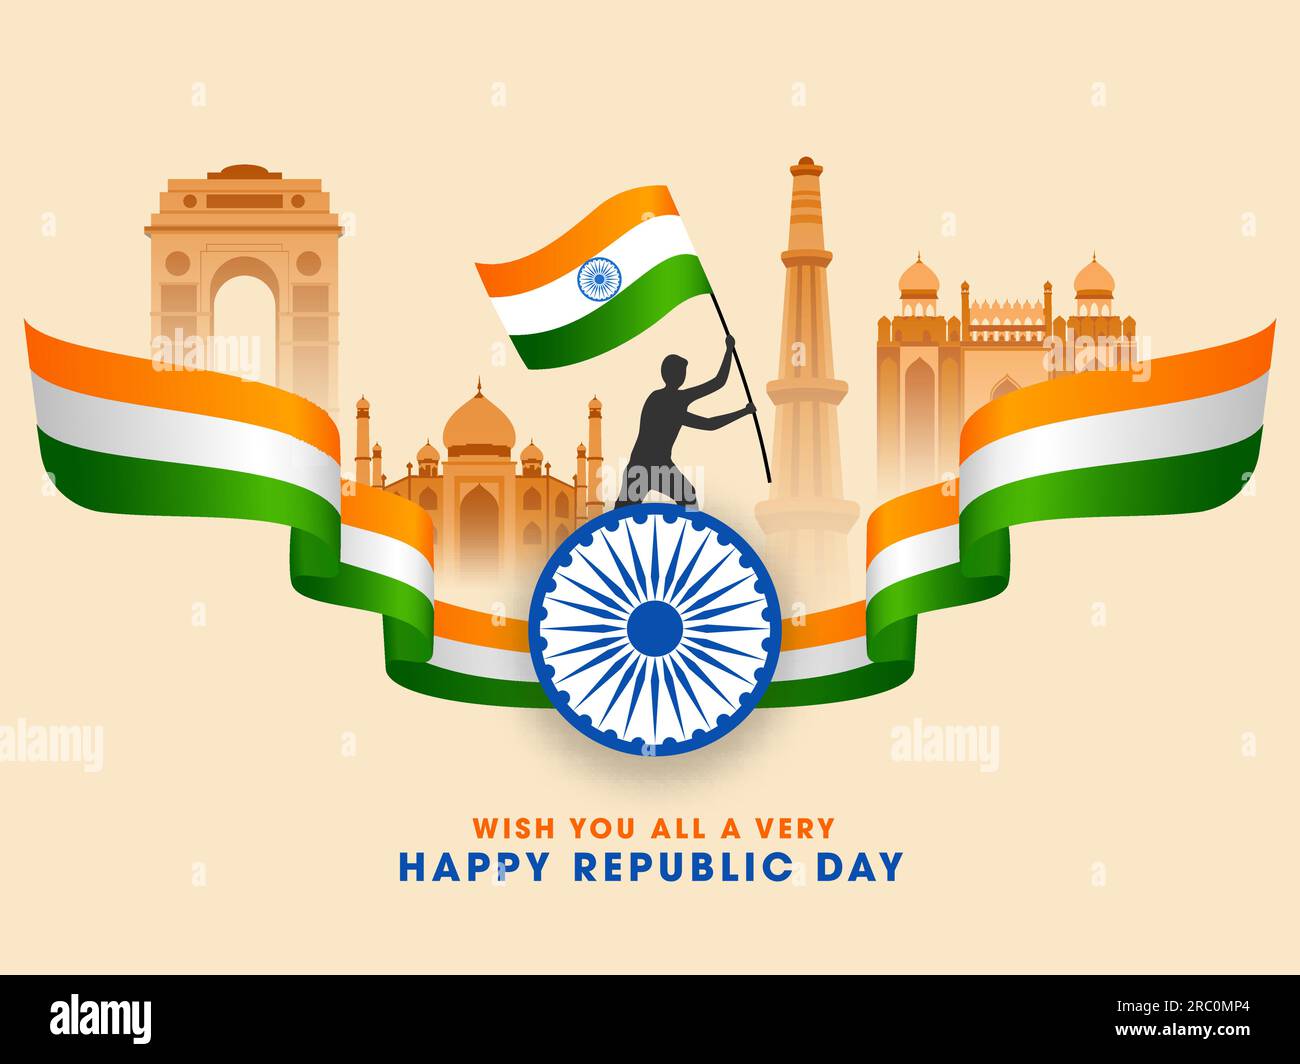 India Famous Monuments With Silhouette Man Holding Indian Flag, Ashoka Wheel And Tricolor Wavy Ribbon For Republic Day Concept. Stock Vector